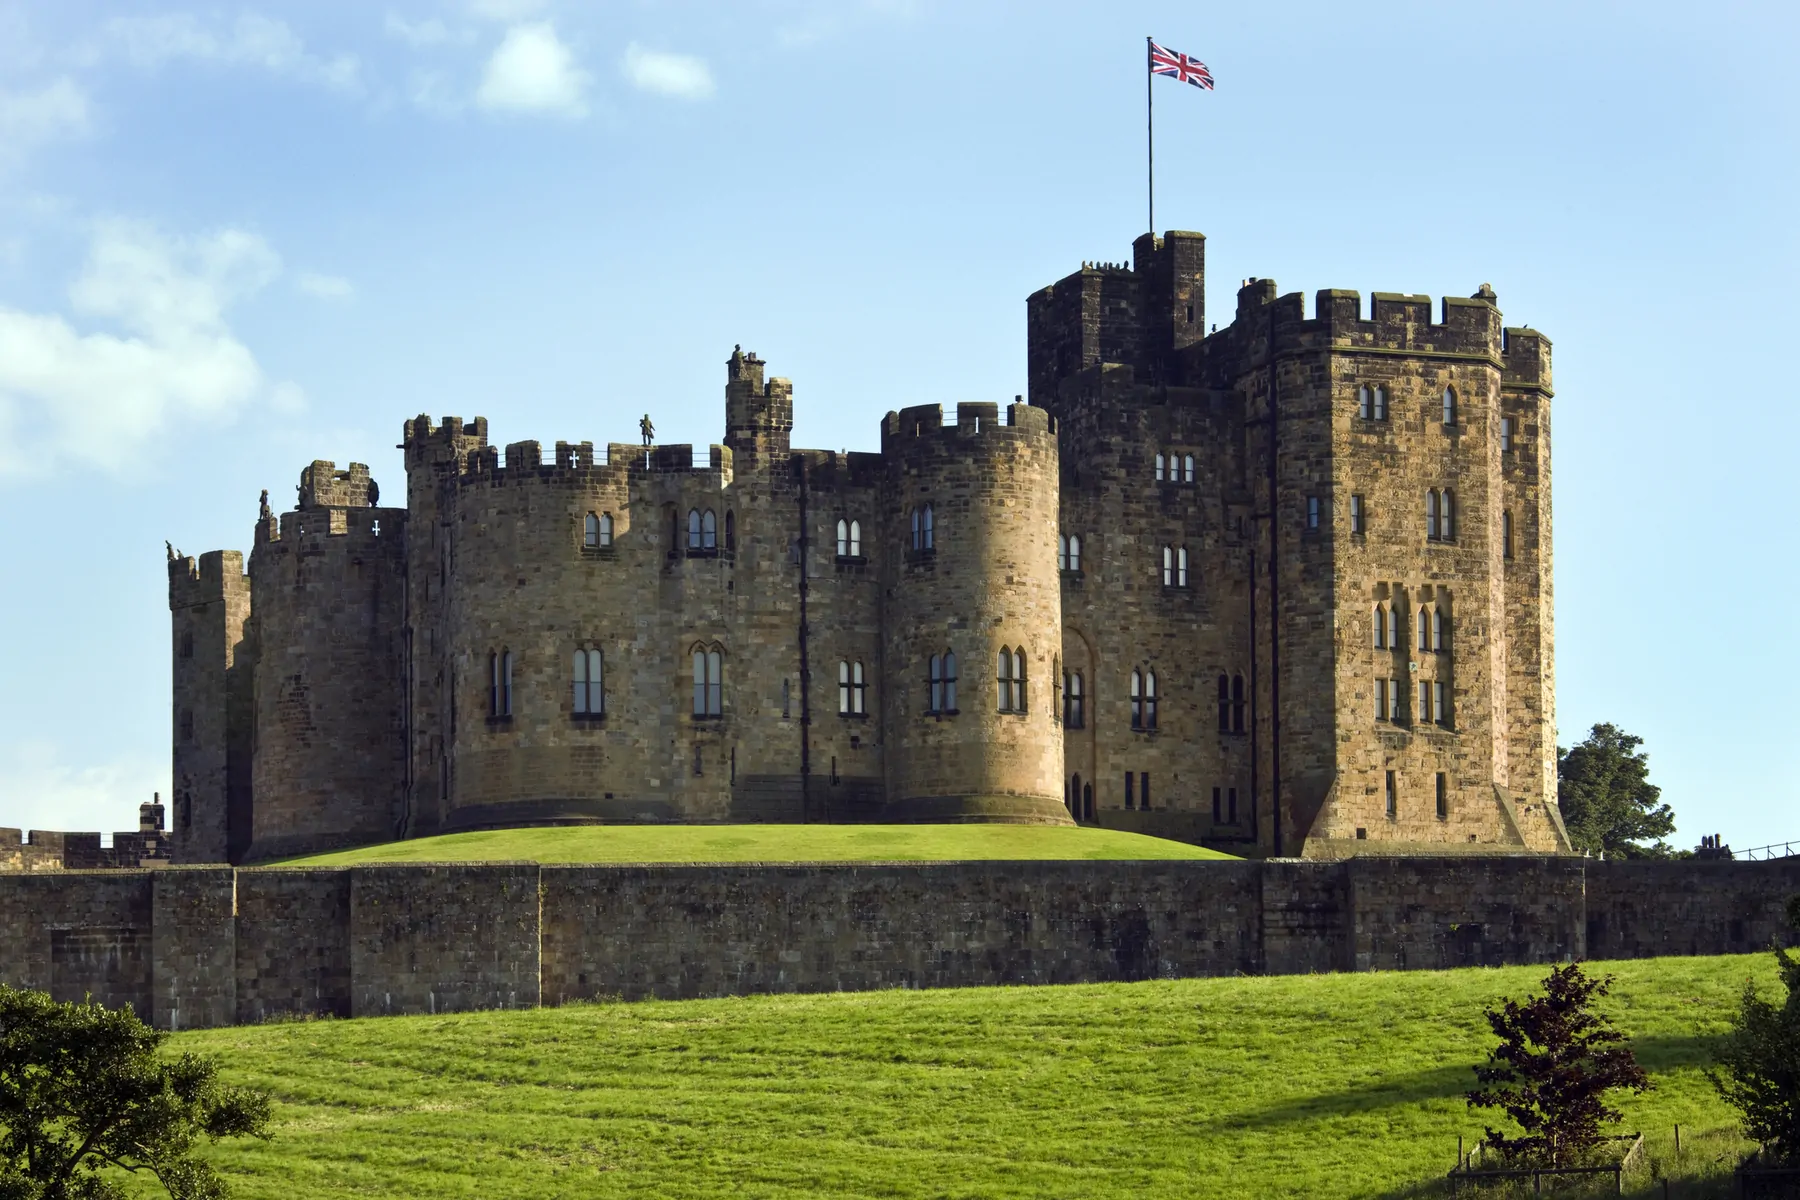 Alnwick Castle in the town of Alnwick in Northumberland in North East England. Dates from 1096AD when Yves de Vescy became Baron of Alnwick and erected the earliest parts of the castle. Since 1309 the castle has been in the hands of the Percy Family who are the Dukes and Earls of Northumberland.